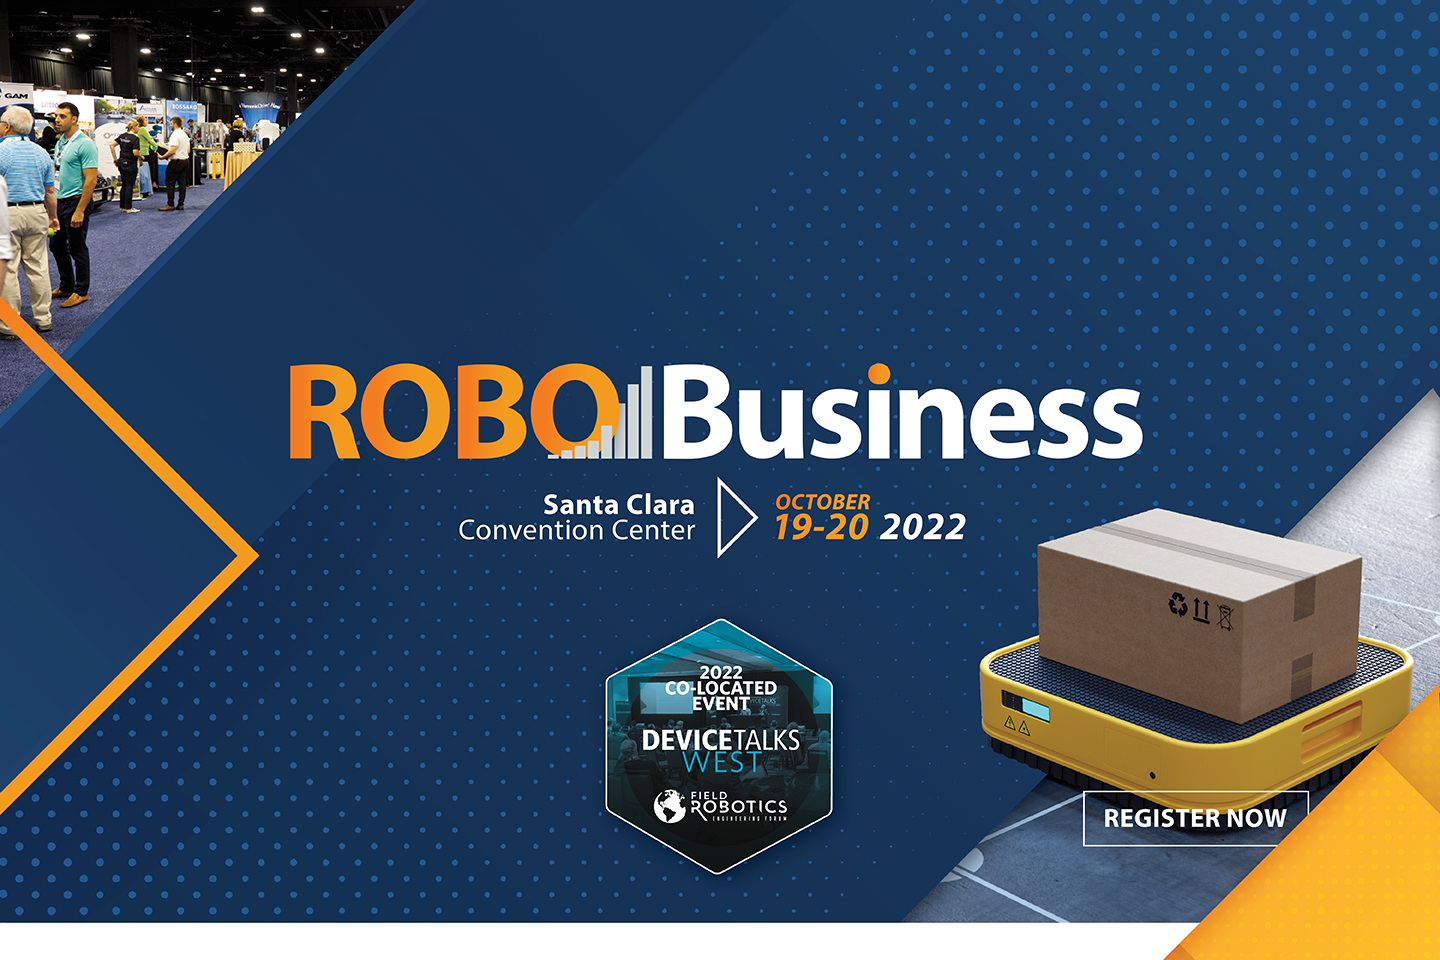 A blue background with the word "RoboBusiness" and below that "Santa Clara Convention Center" and "October 19-20 2022"